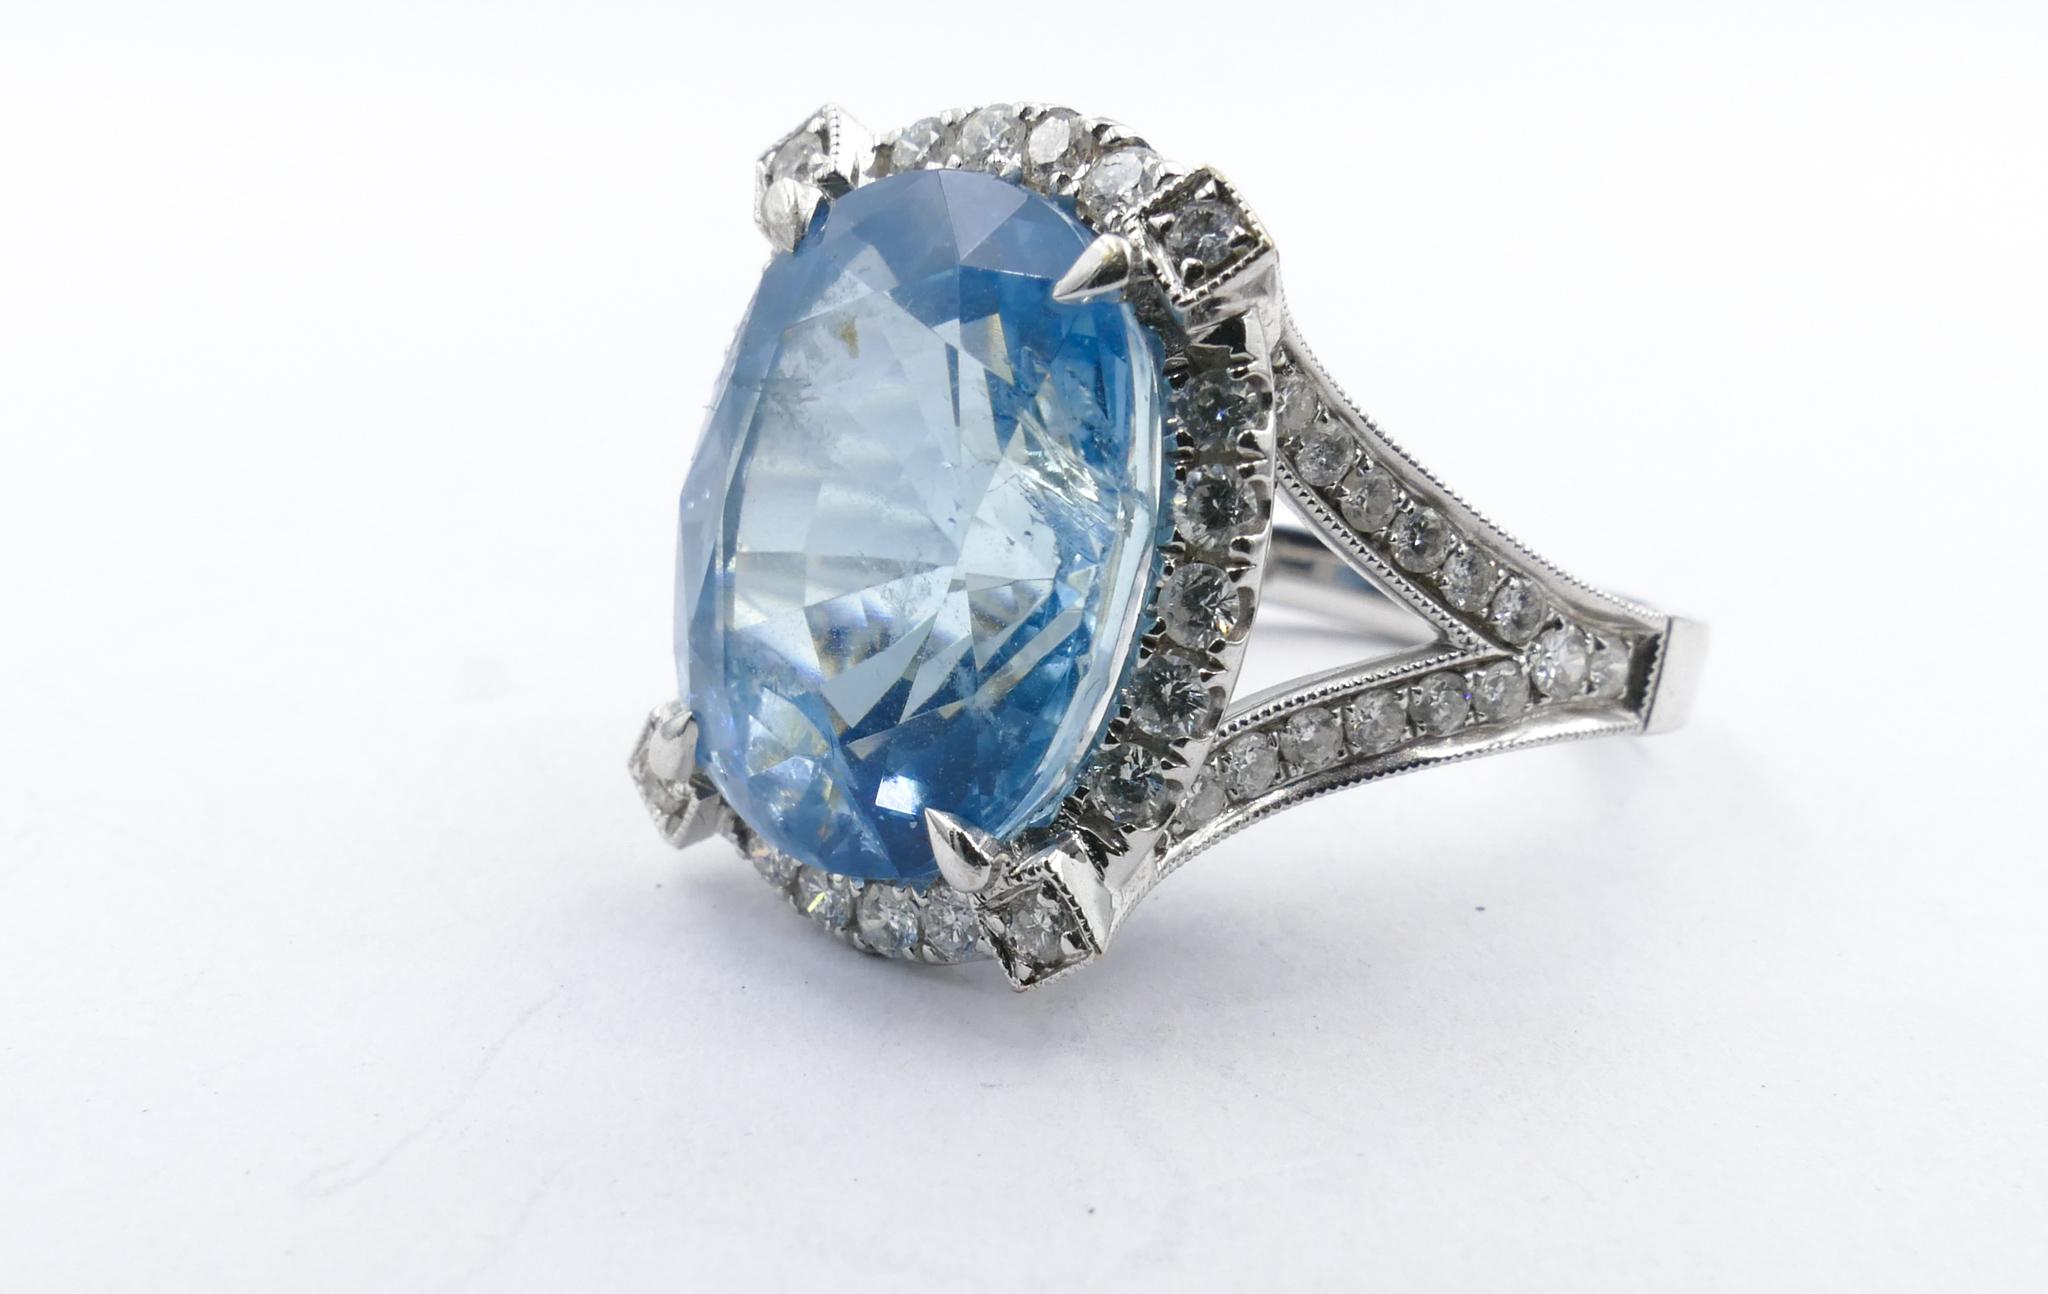 A large Oval Cur 11.75 Carat Aquamarine Stone (15.47mm X 12.57mm X 9.62mm) of a beautiful mid blue with very minor inclusions is the centrepiece of the Ring. Surrounding it are 122 Brilliant Cut Diamonds, grain micro-claw set, Colour G/H and clarity